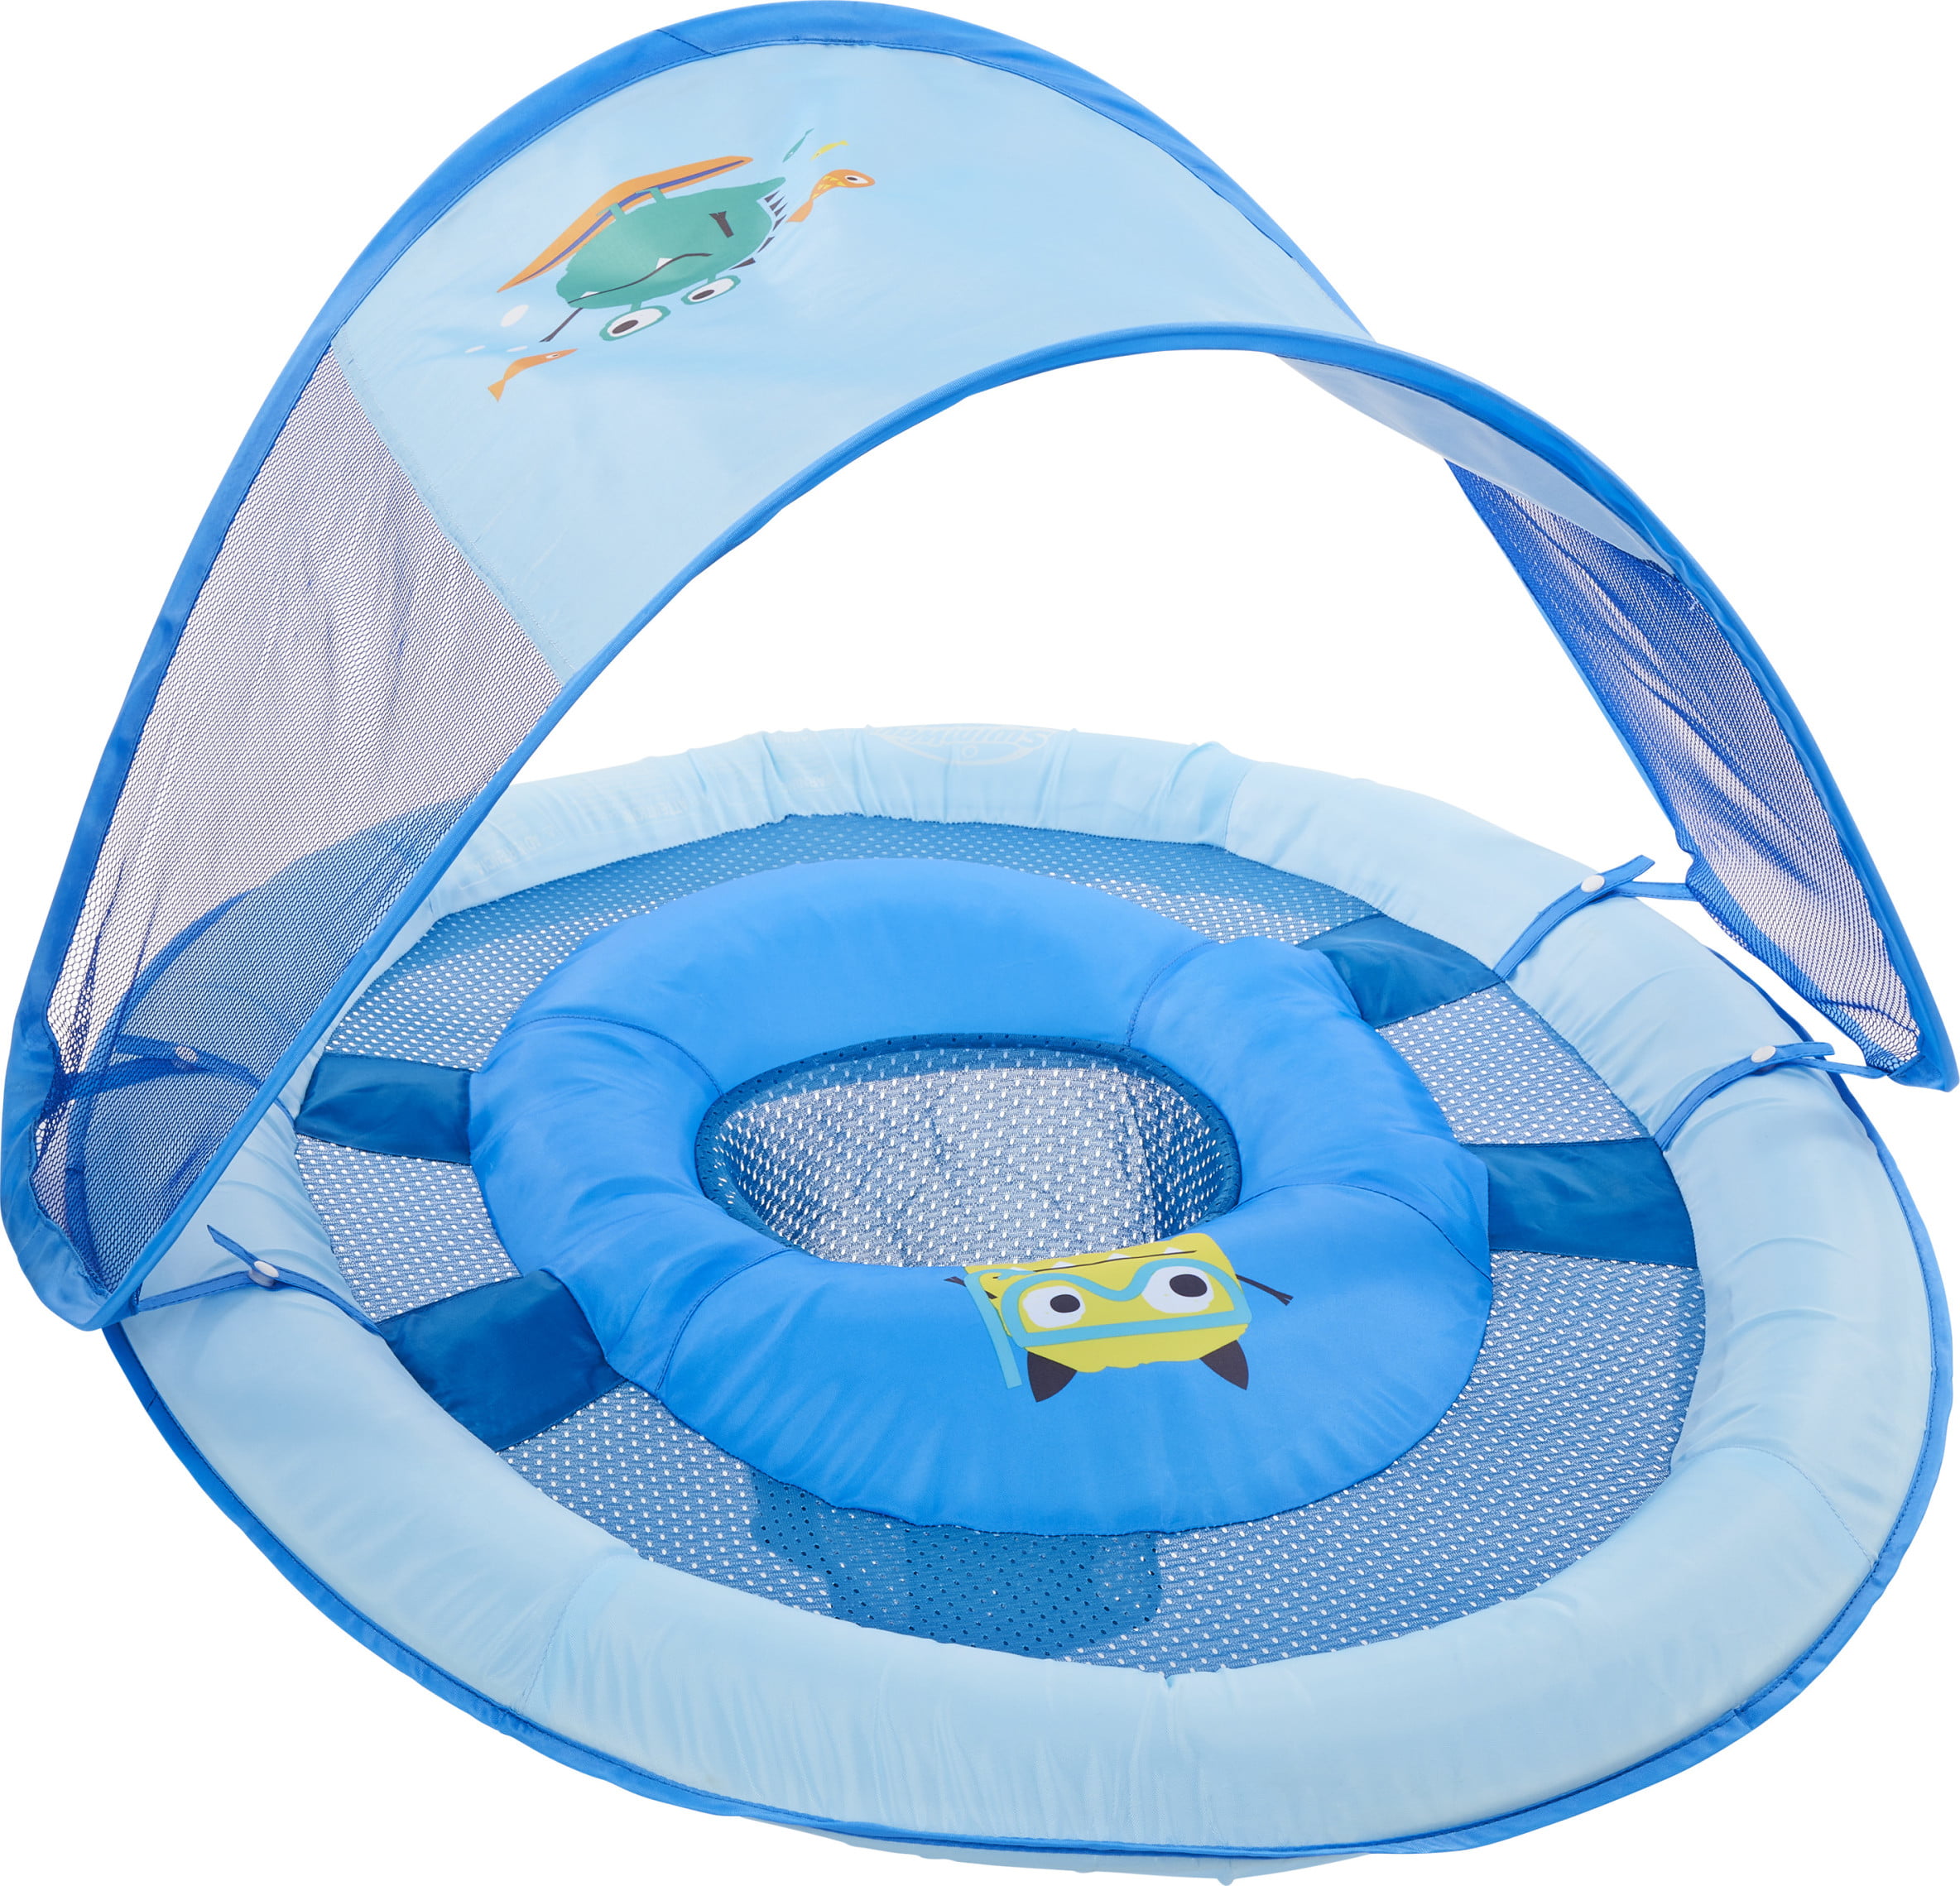 Inflatable Baby Float Boat Seat with Shade Canopy Kids Swimming Ring Pool Aid UK 